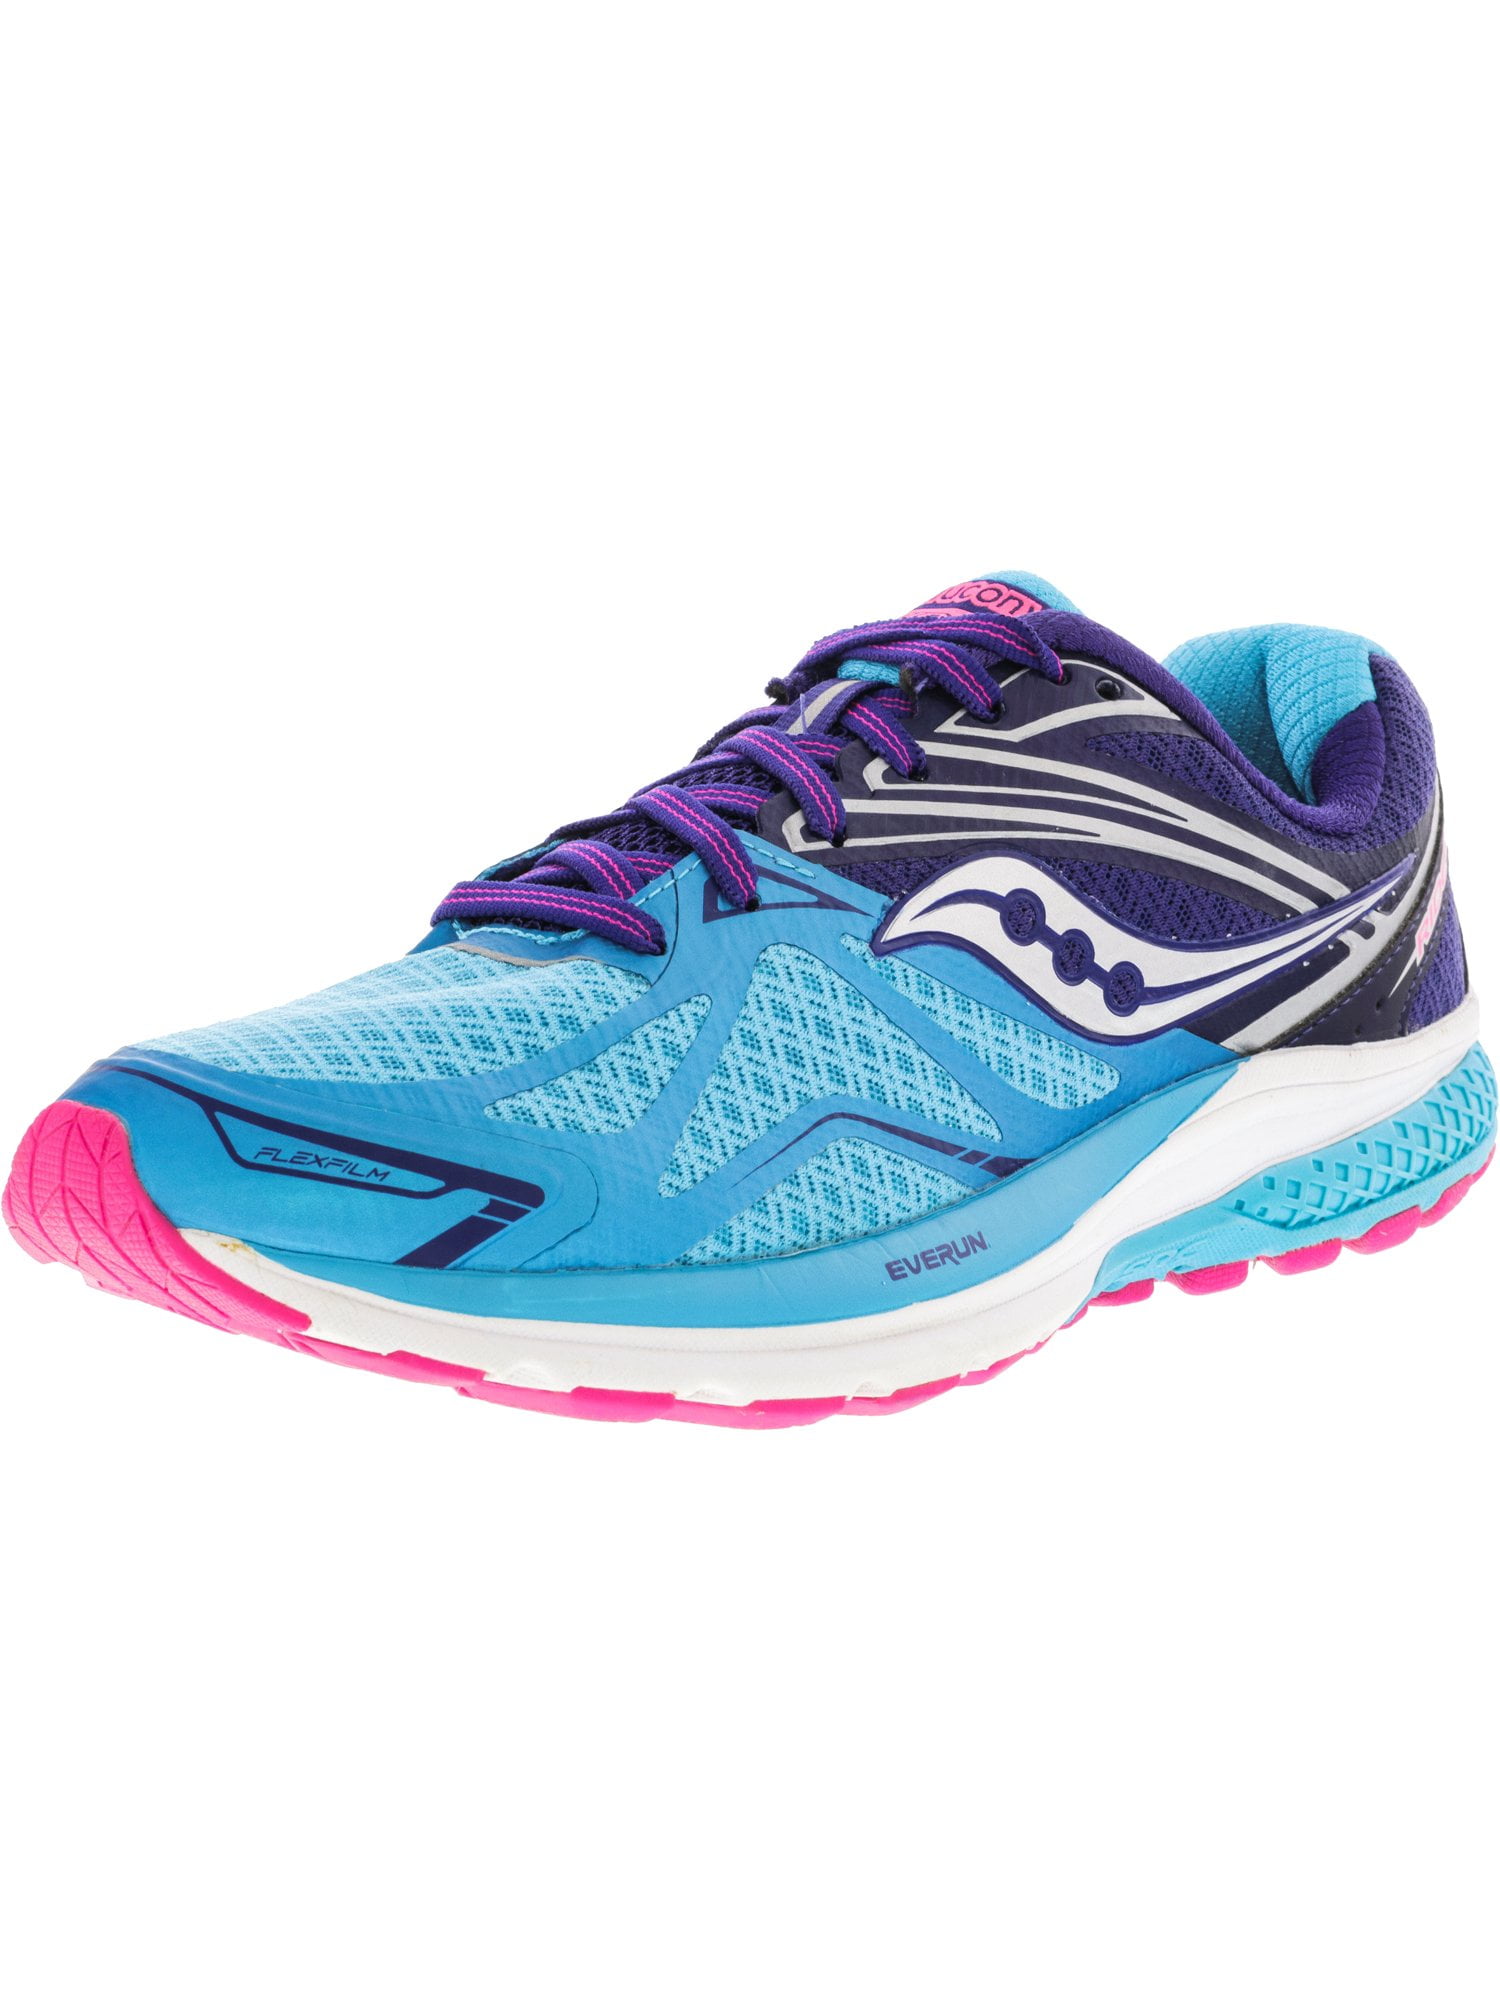 SAUCONY RIDE 9 WOMENS LADIES NEUTRAL RUNNING GYM TRAINERS SPORTS SHOES 4 5 6 